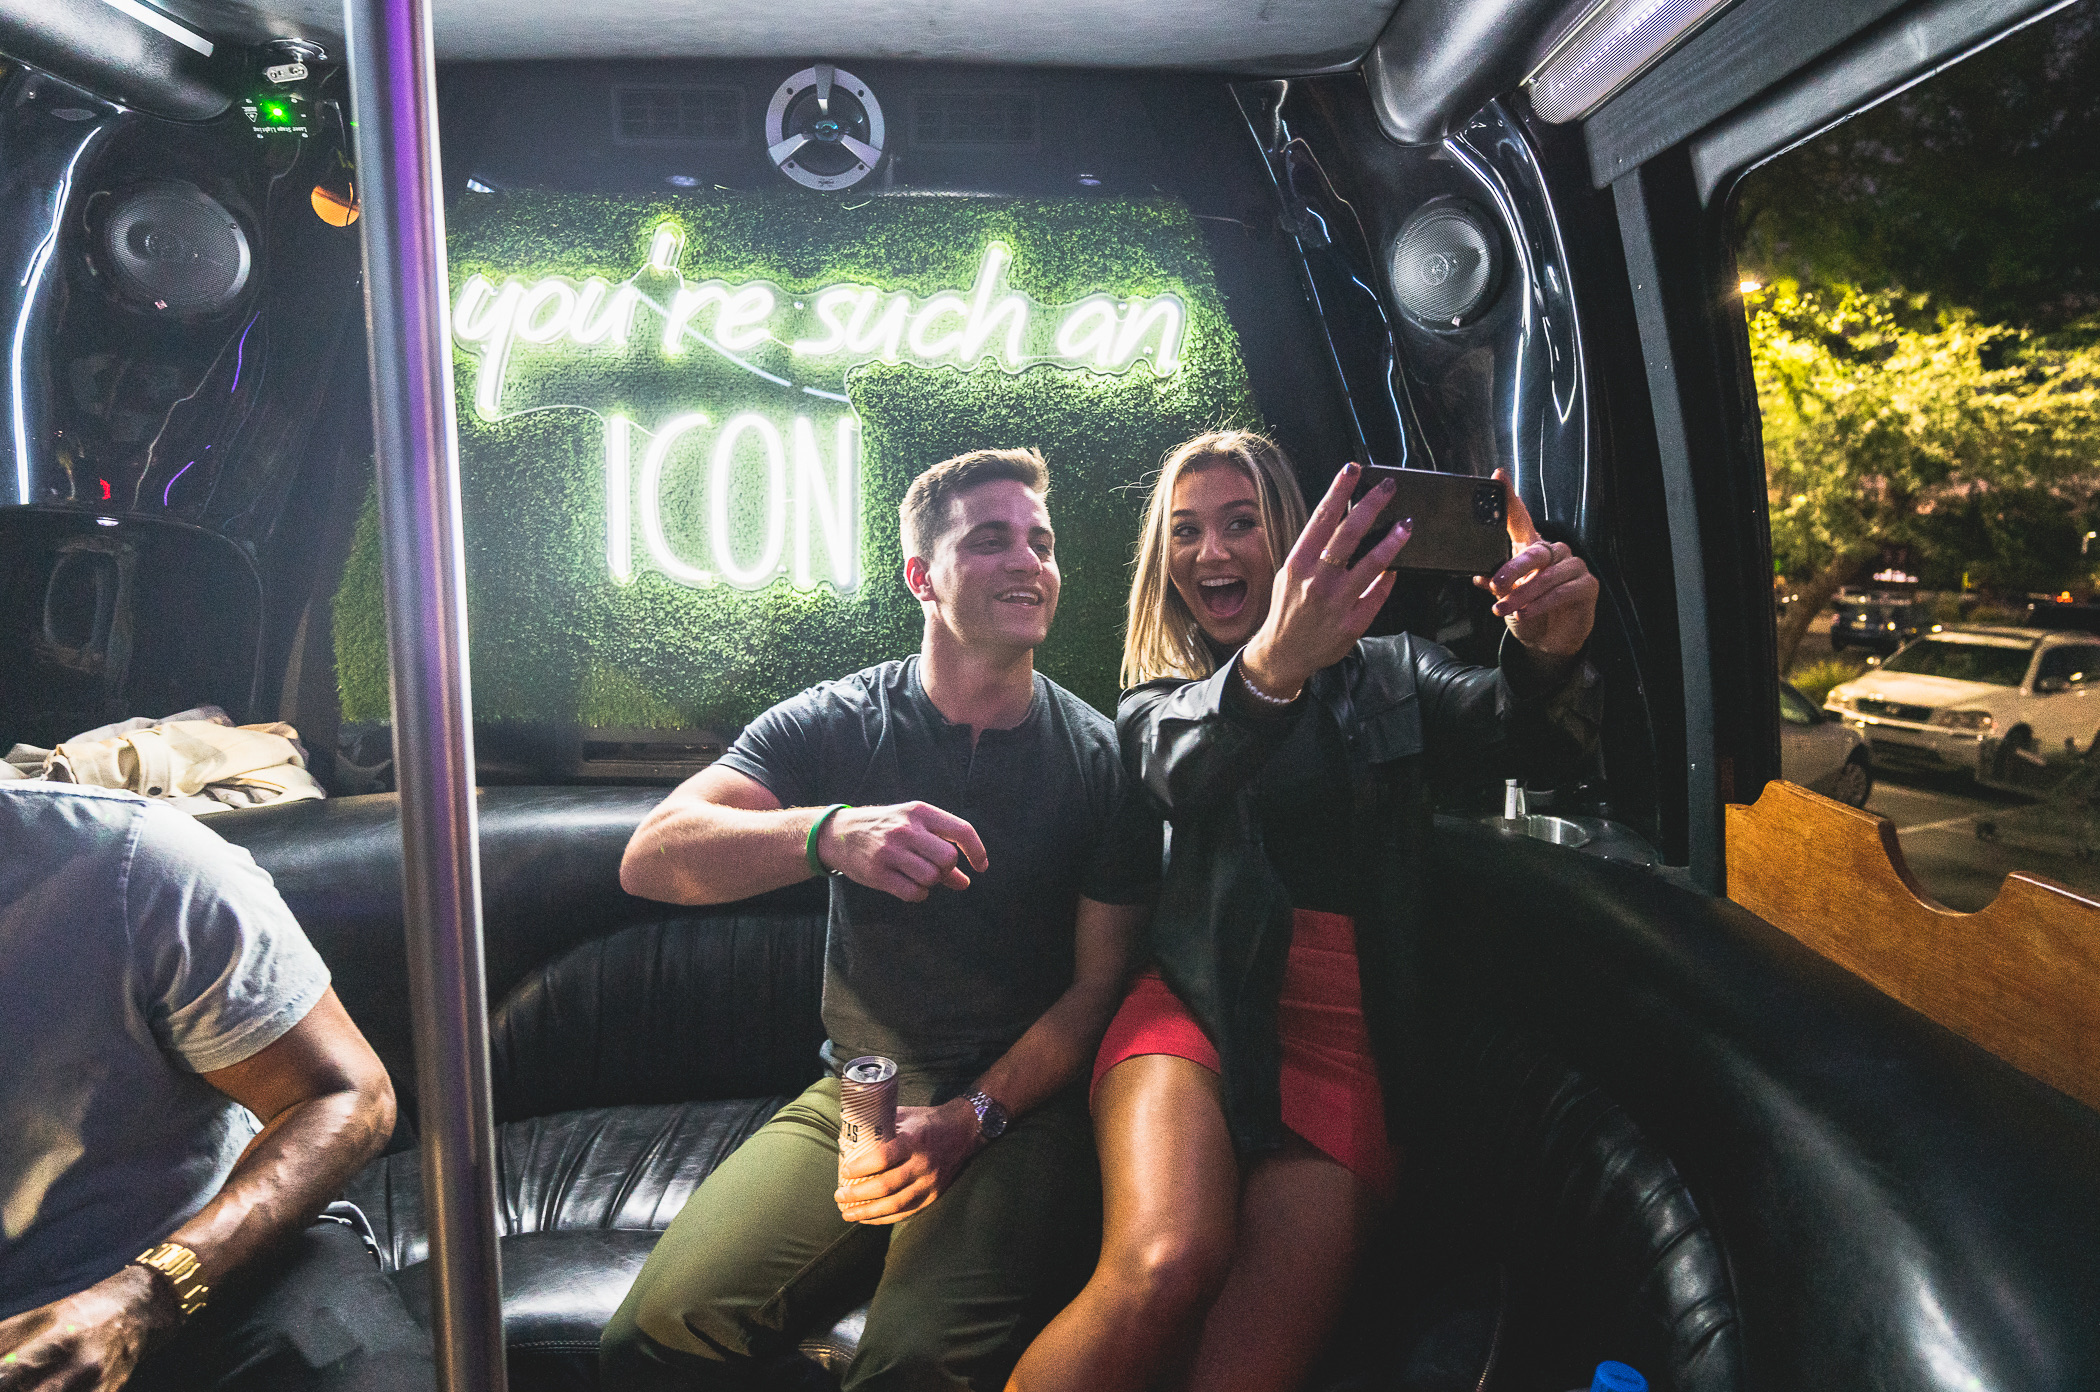 Party-goers taking a selfie in front of LED sign